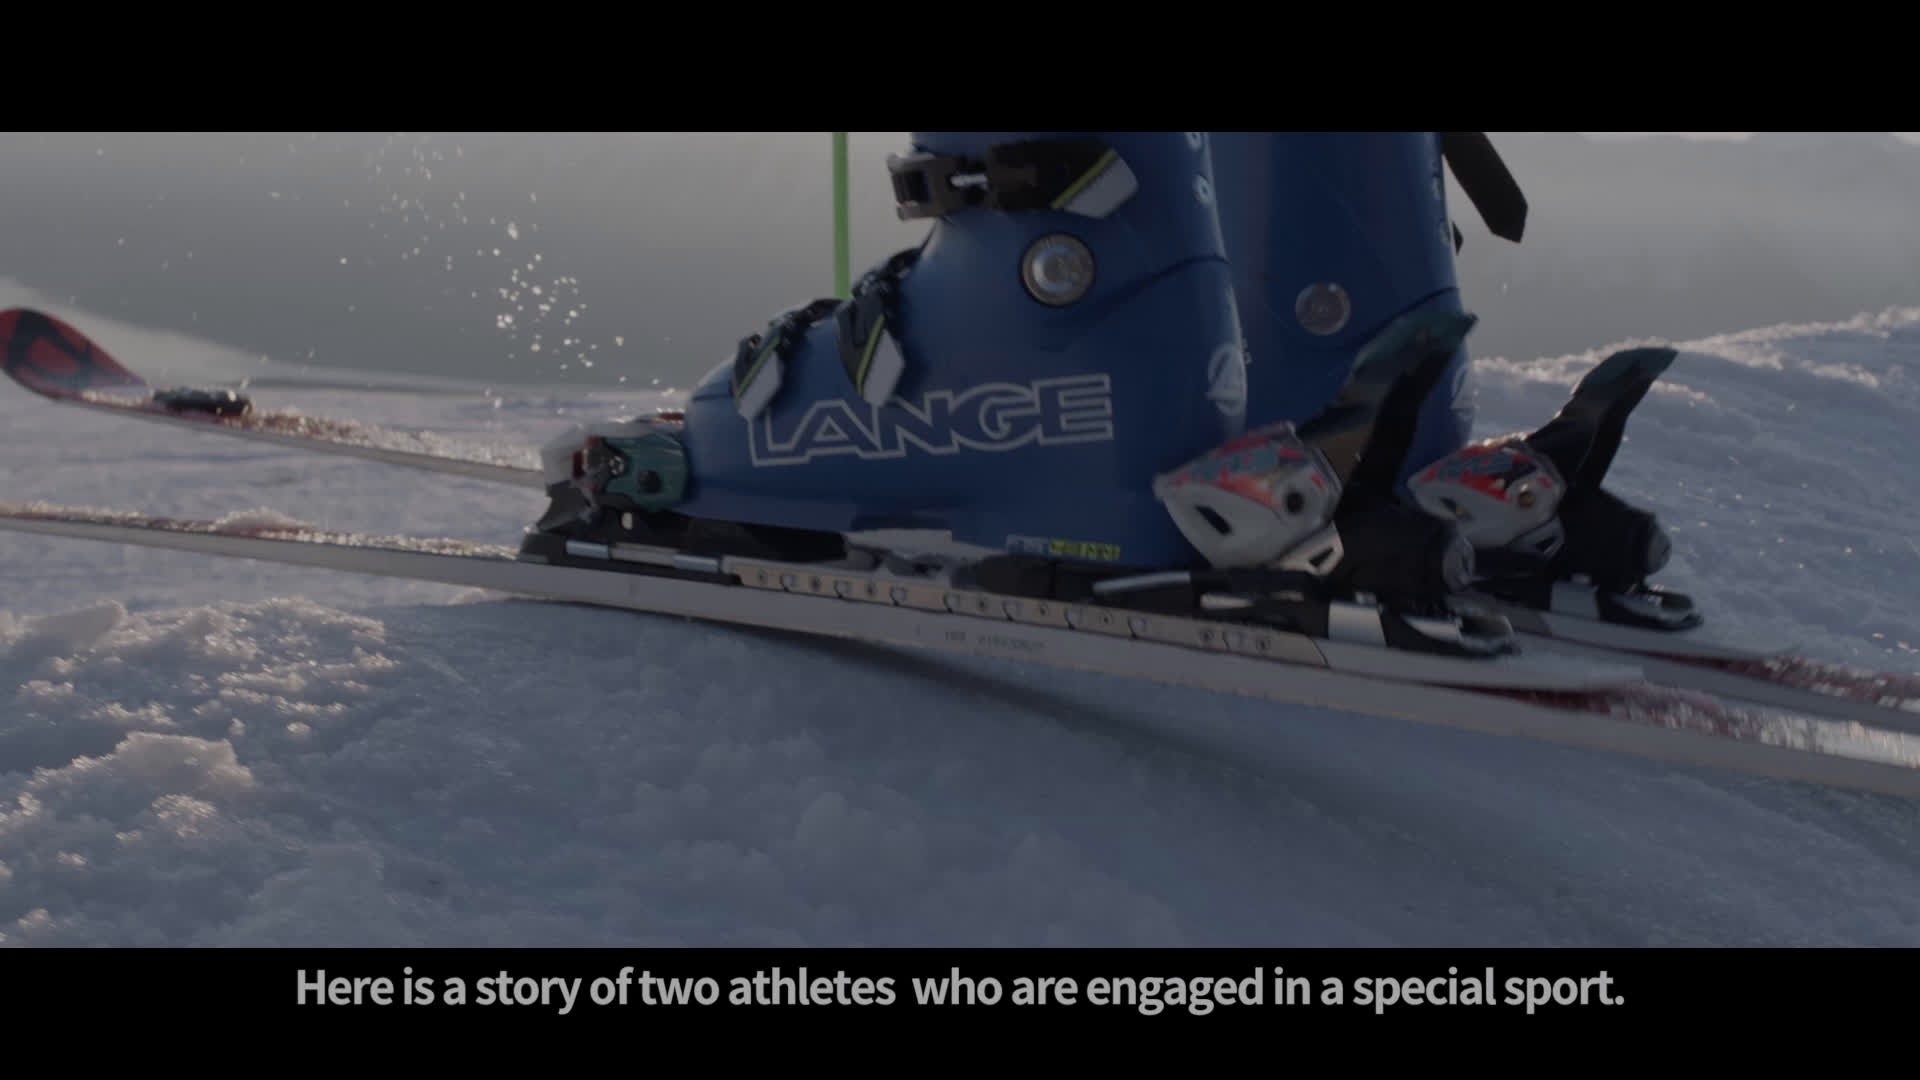 A special story of a visually-impaired alpine skier and her guide